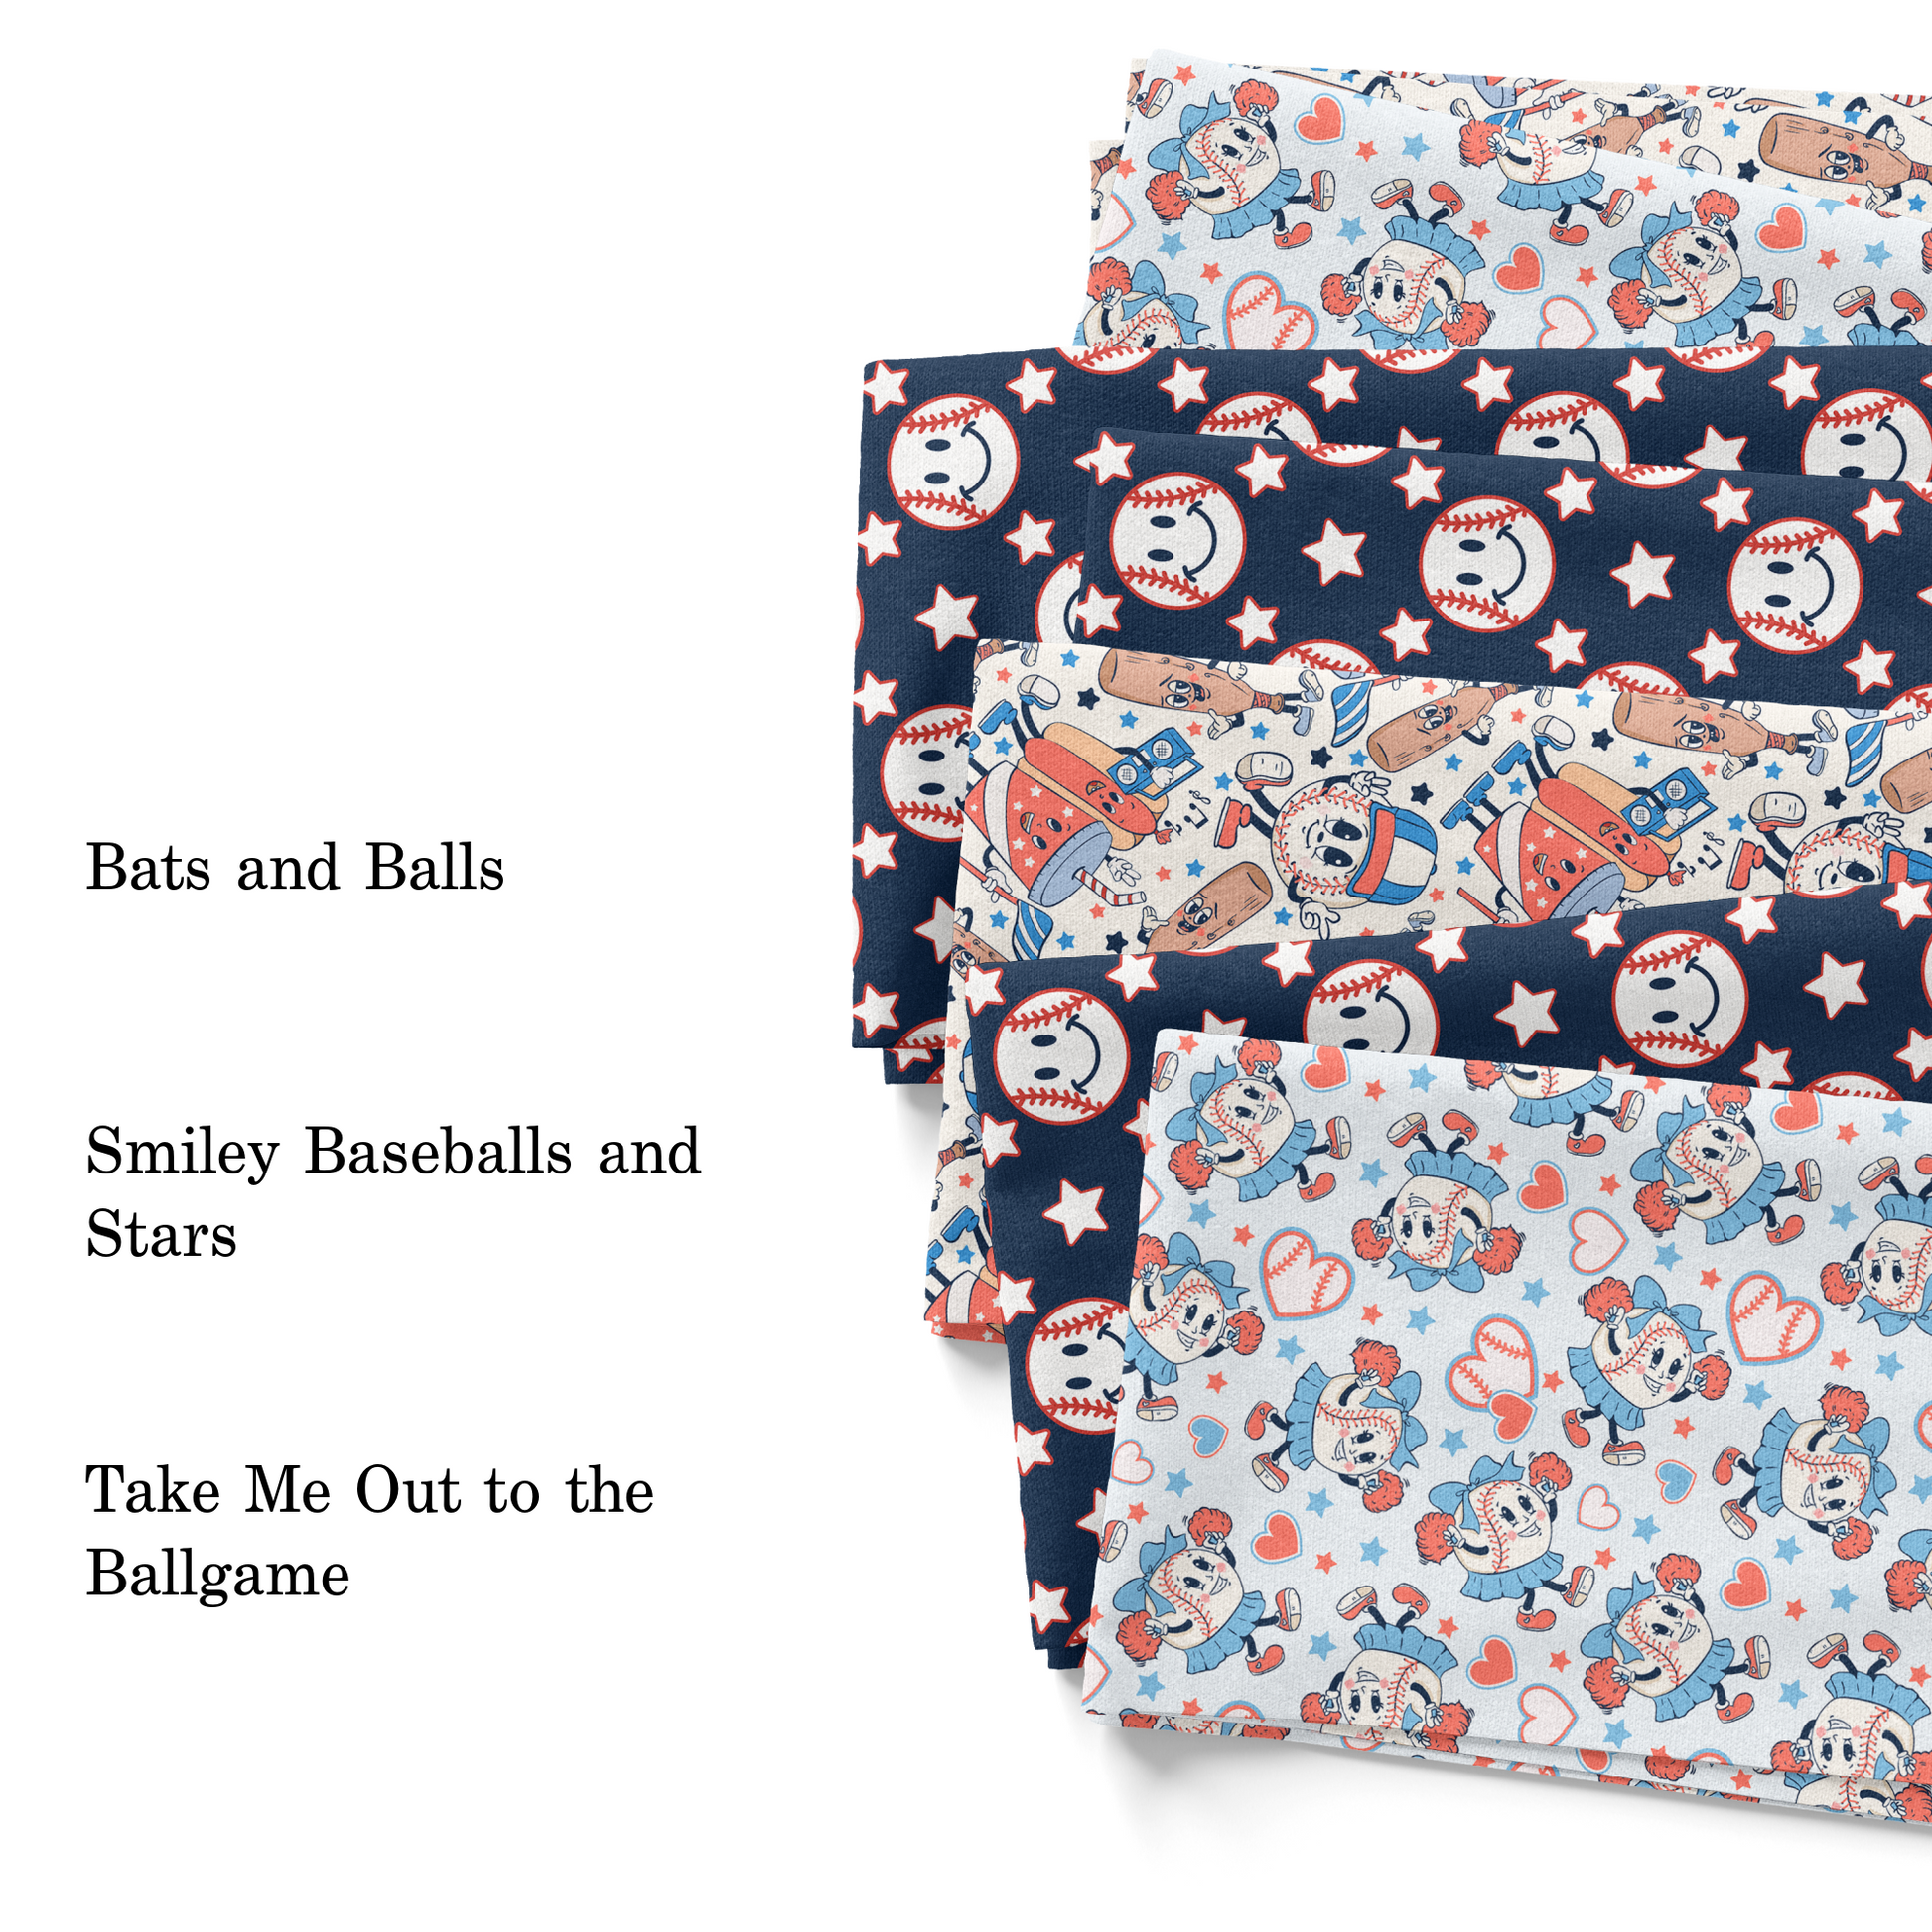 Muse bloom baseball collection fabric swatches with names.